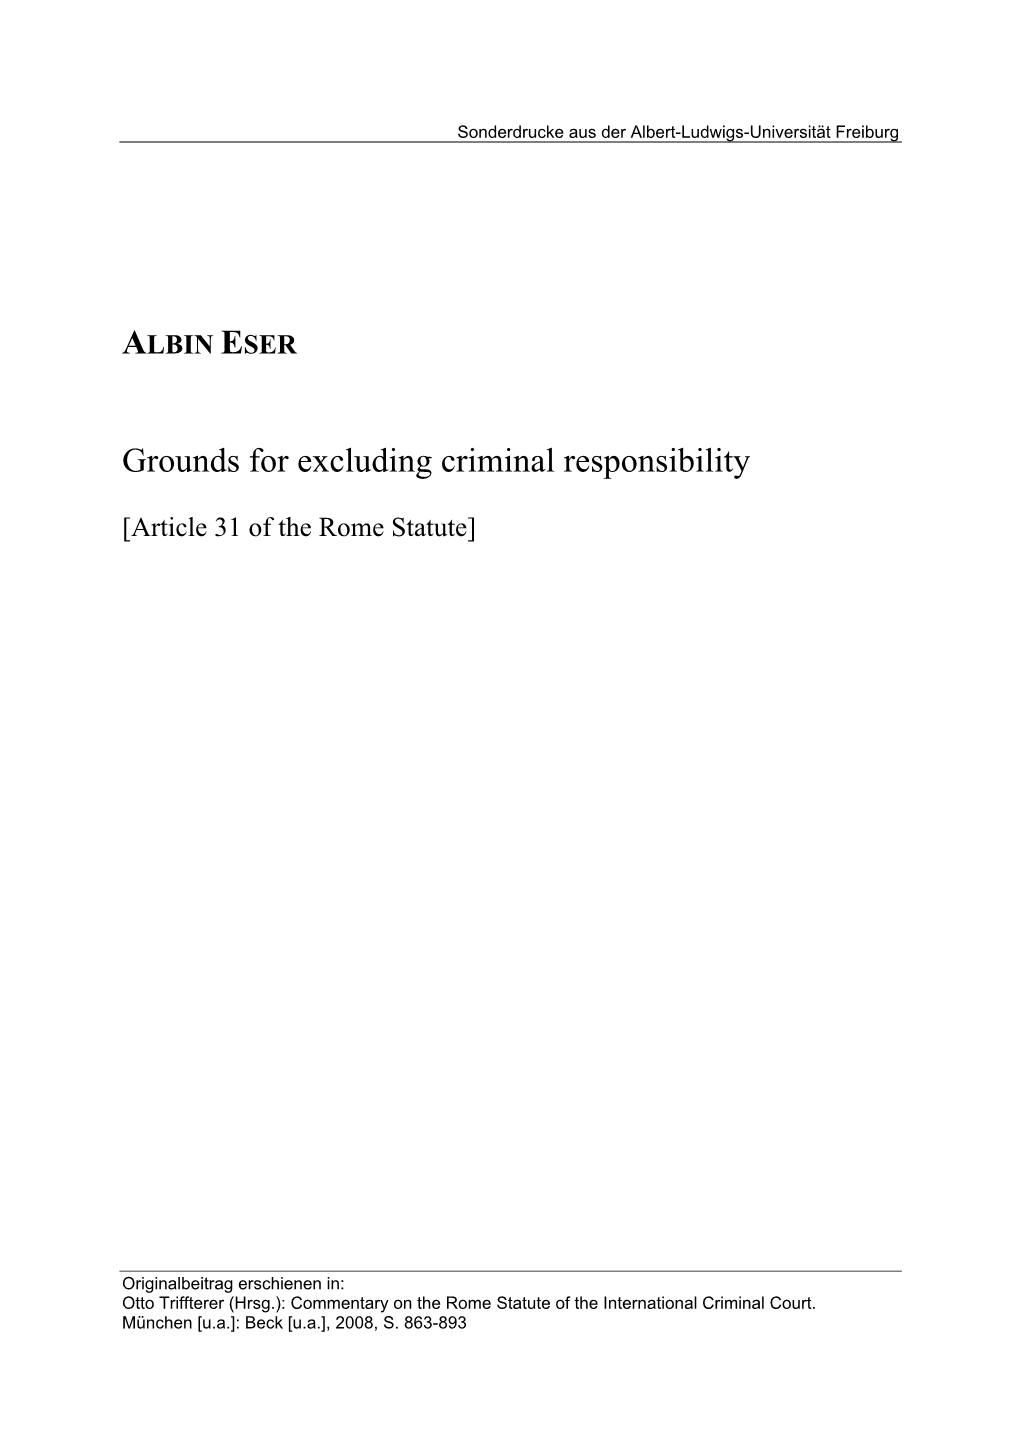 Albin Eser Grounds for Excluding Criminal Responsibility Article 31